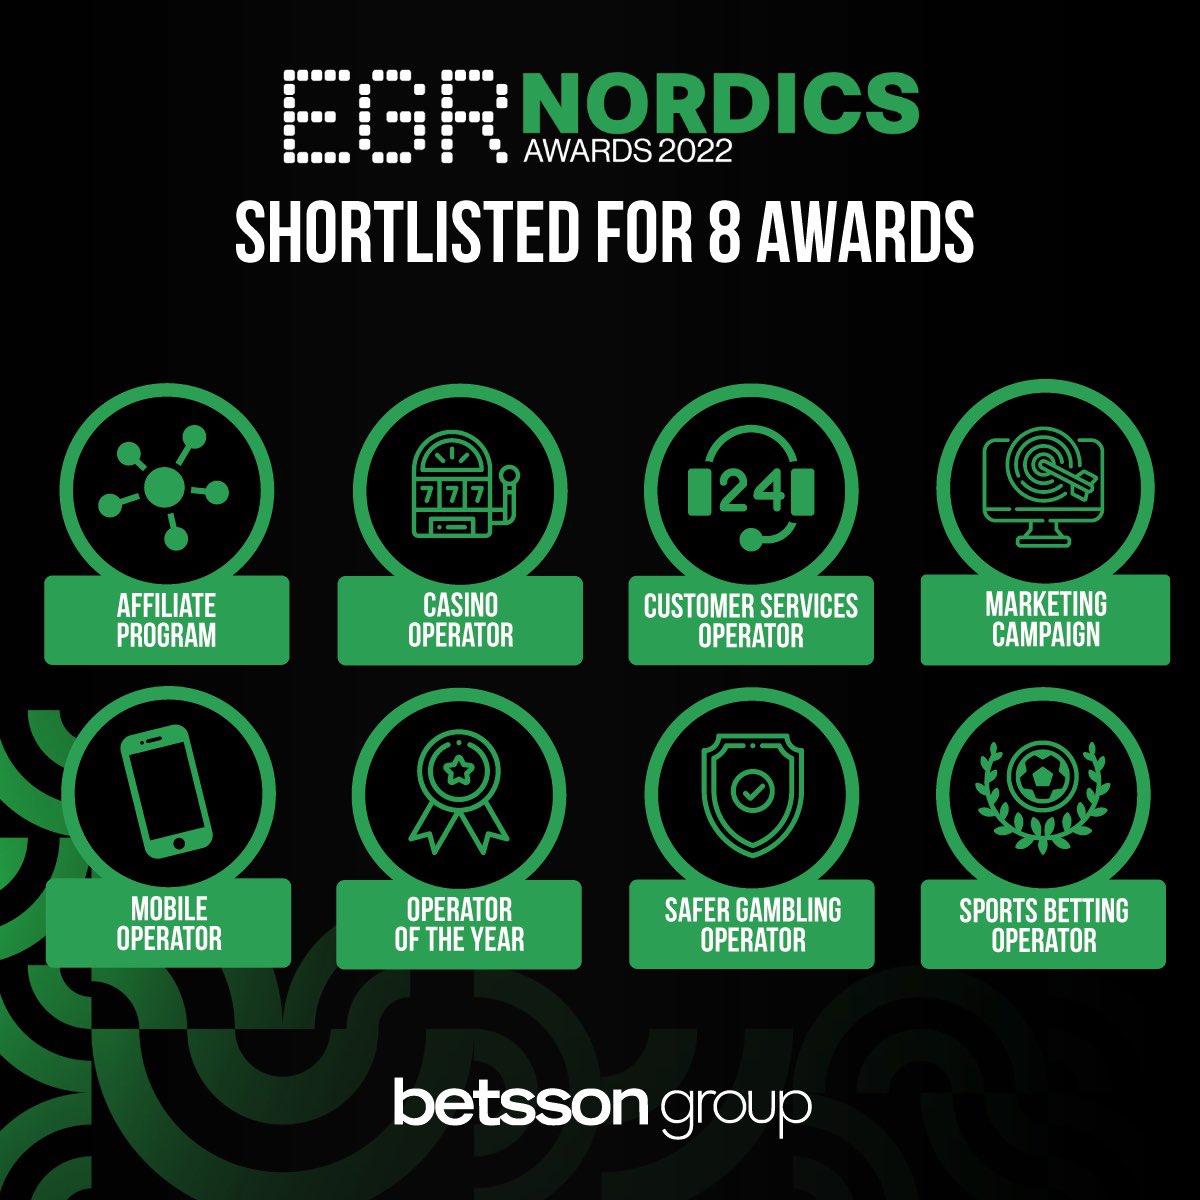 Tomorrow we're attending the EGR Nordic Awards and we're shortlisted for 8 categories.

🏆 Affiliate programmer
🏆 Casino operator
🏆 Customer services operator
🏆 Marketing campaign
🏆 Mobile operator
🏆 Operator of the year
🏆 Safer gambling operator
🏆 Sports betting operator https://t.co/6iUAGFpVG8